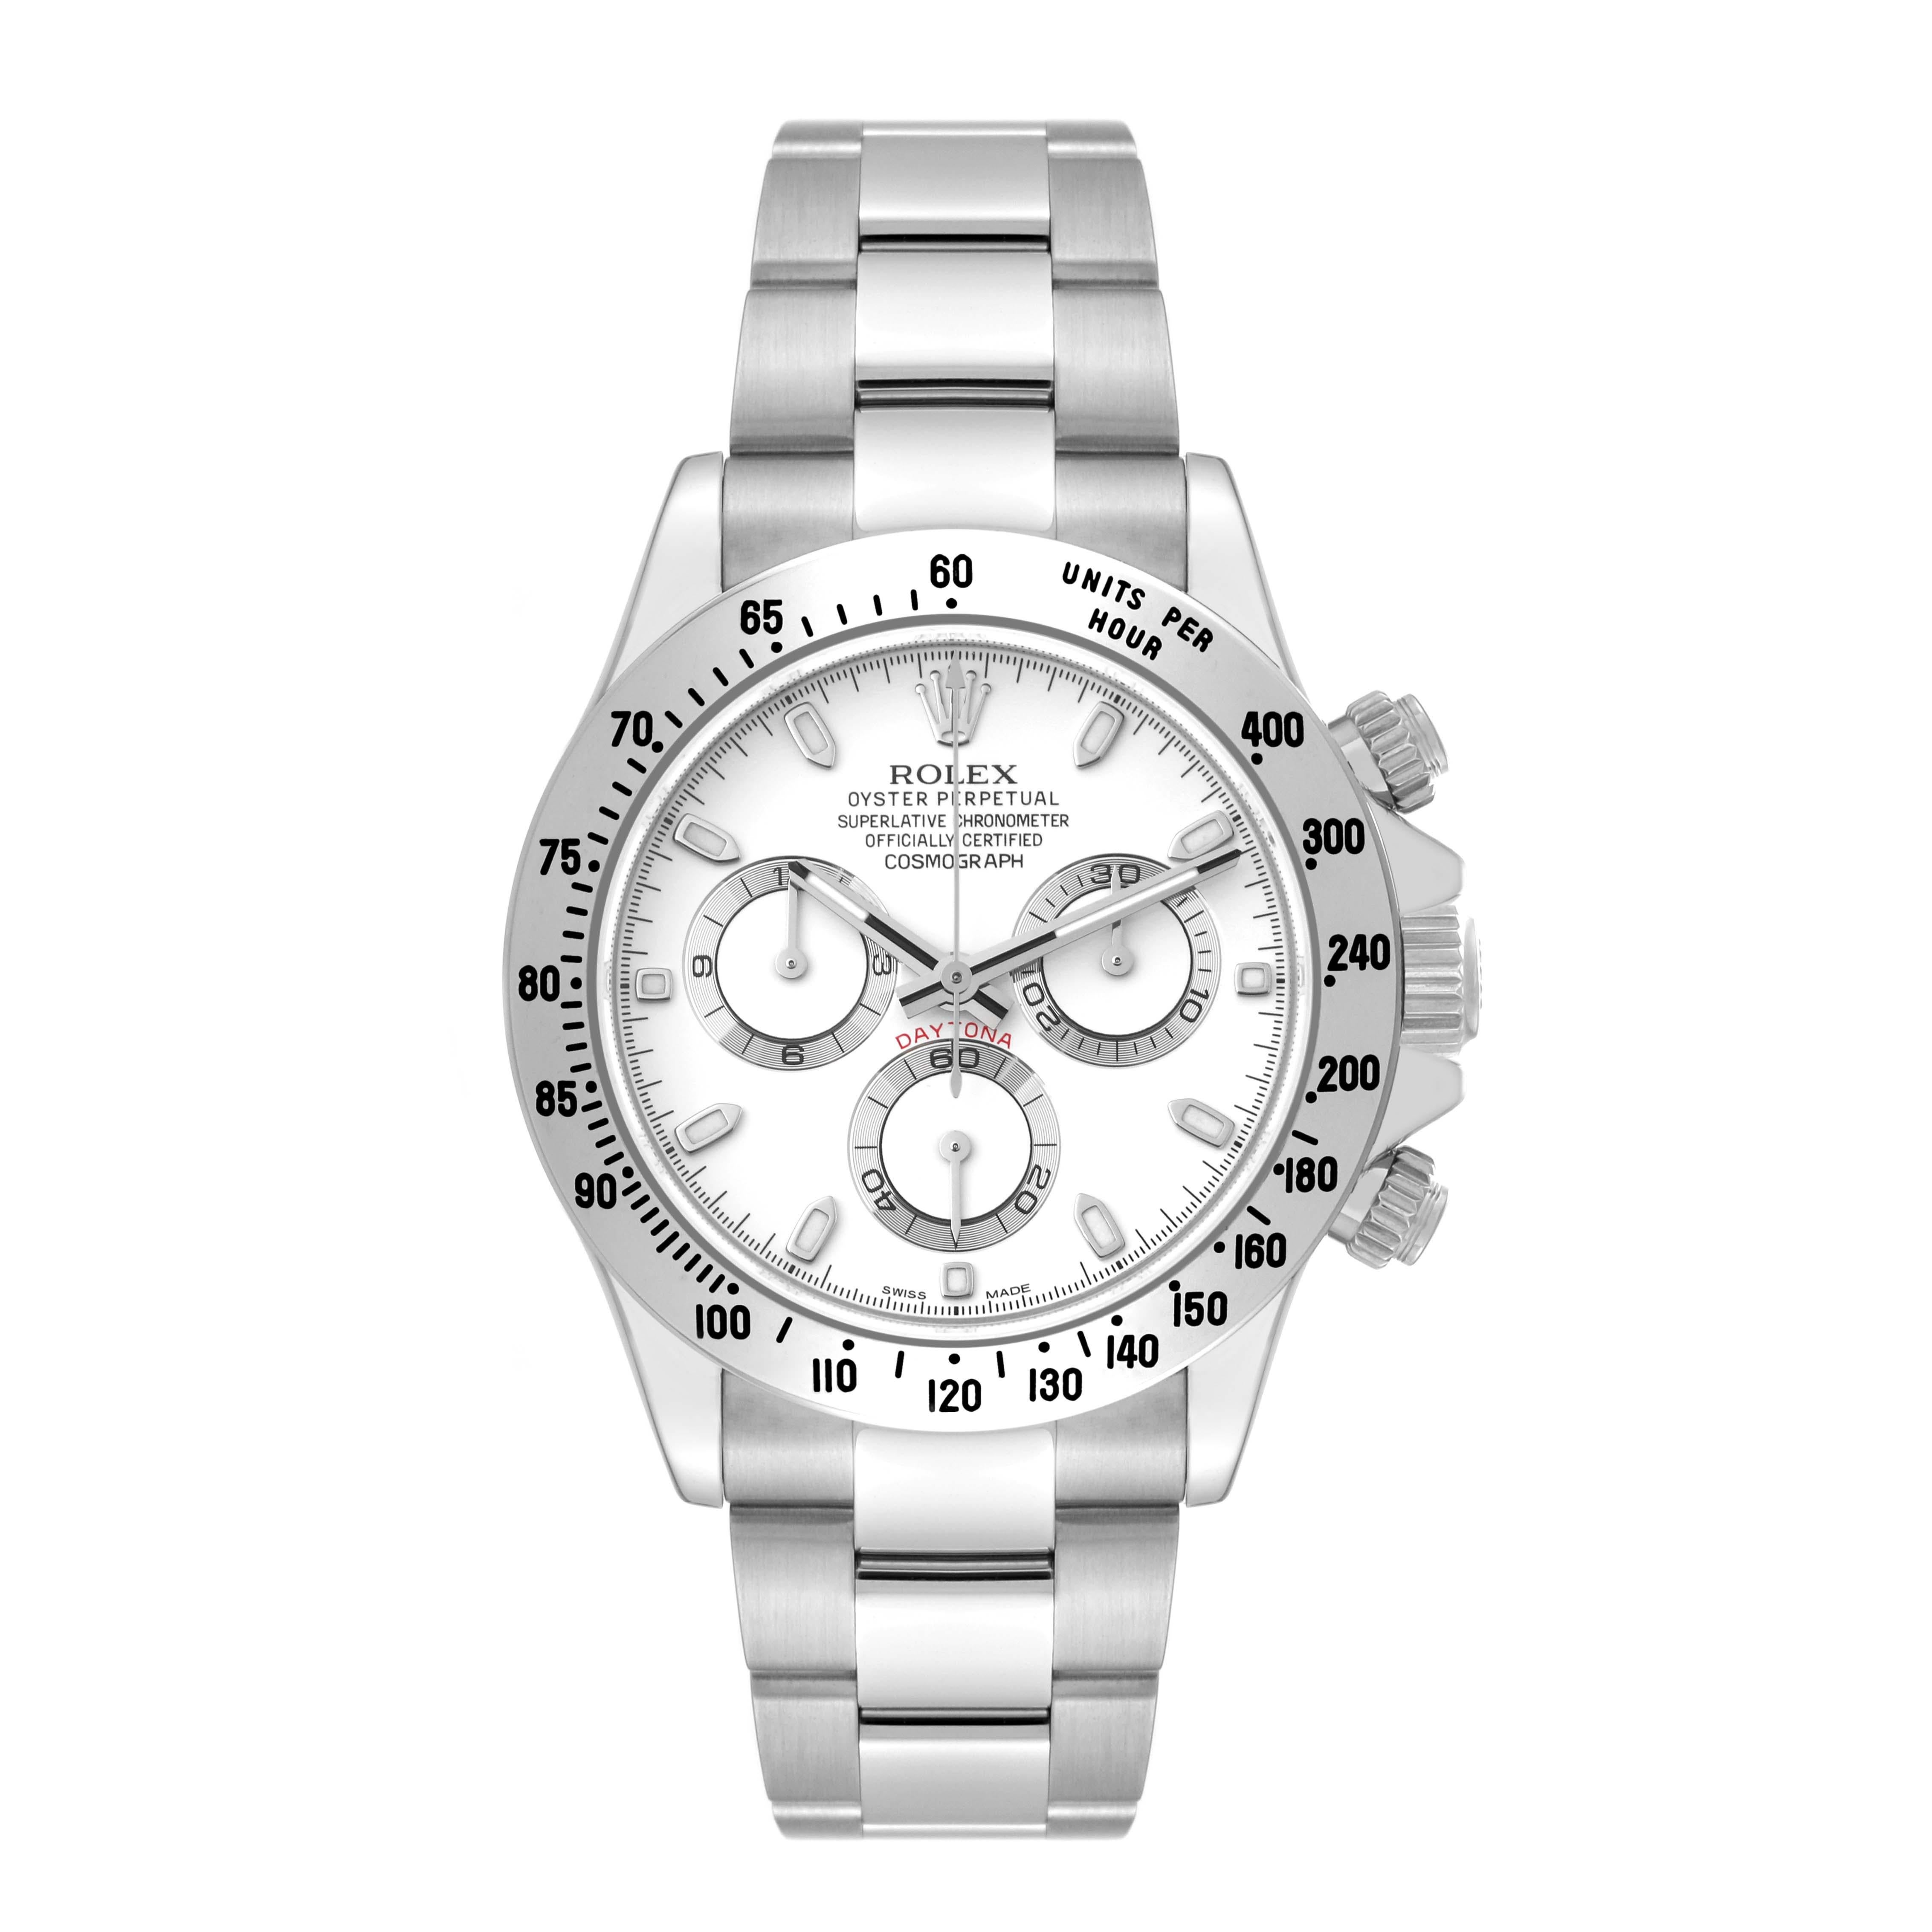 Rolex Daytona White Dial Chronograph Steel Mens Watch 116520 Box Card For Sale 1